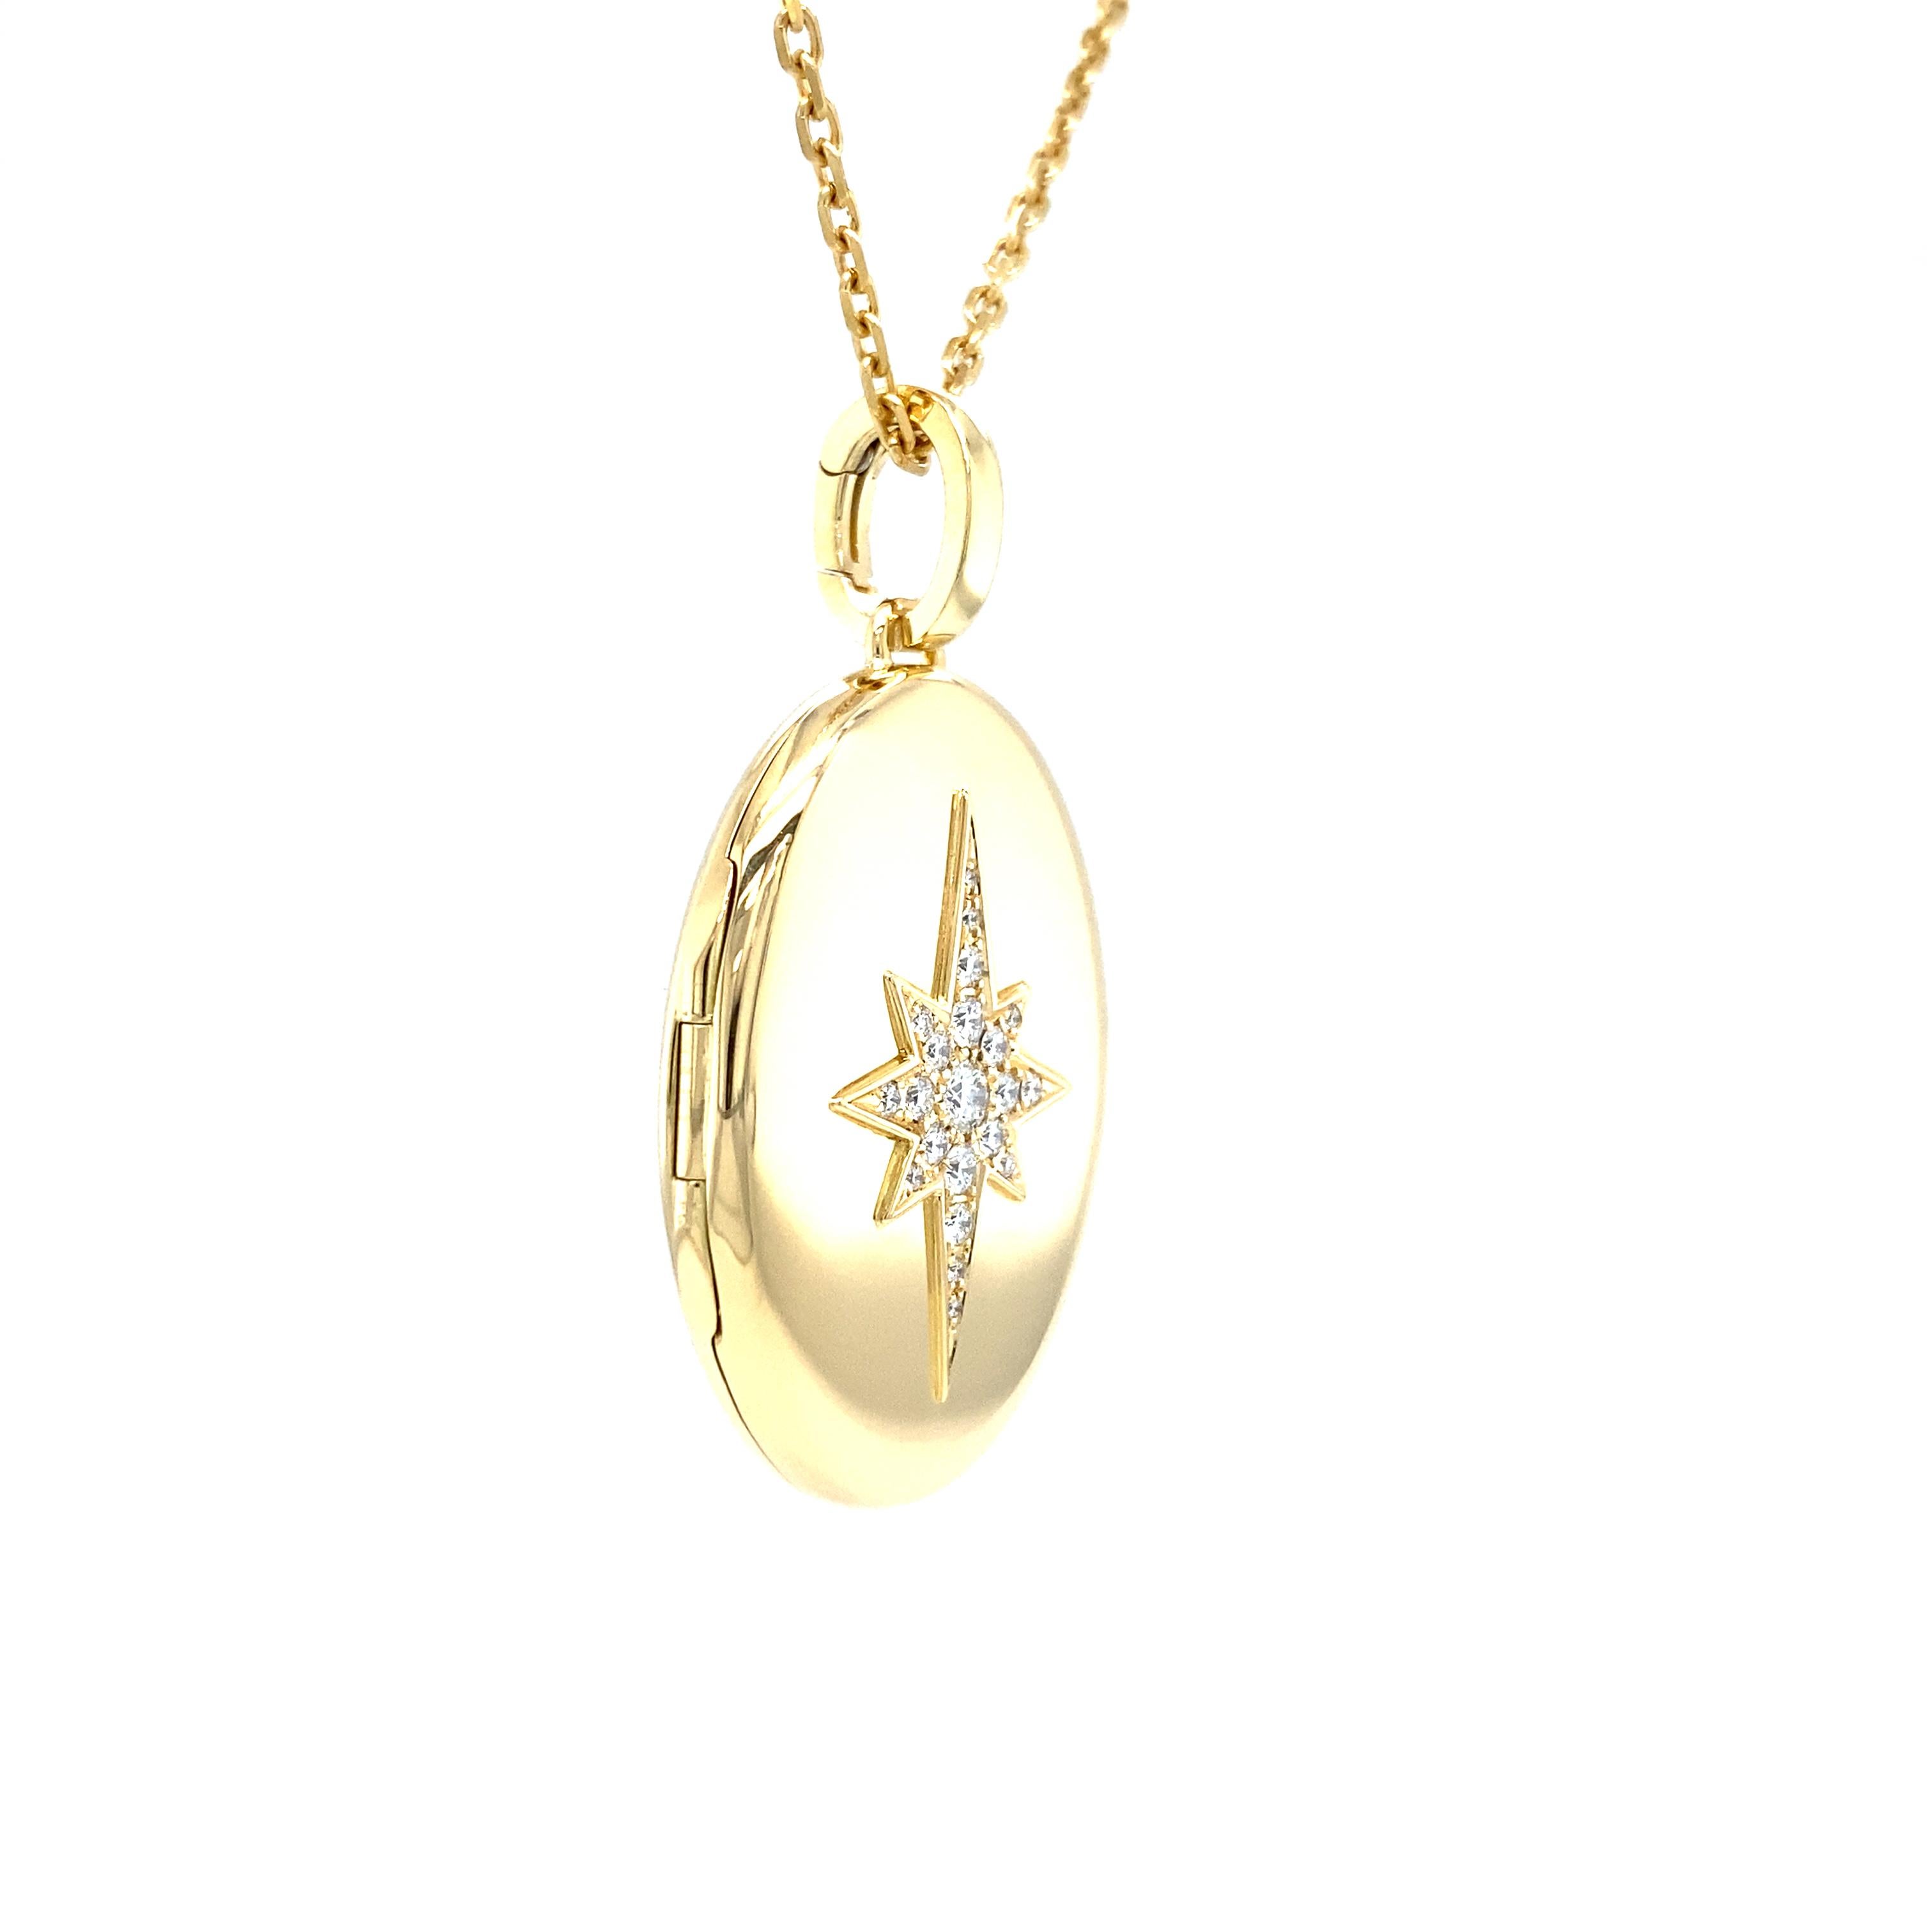 Oval Polished Victoria Locket Pendant - 18k Yellow Gold - 21 Diamonds 0.33ct For Sale 1